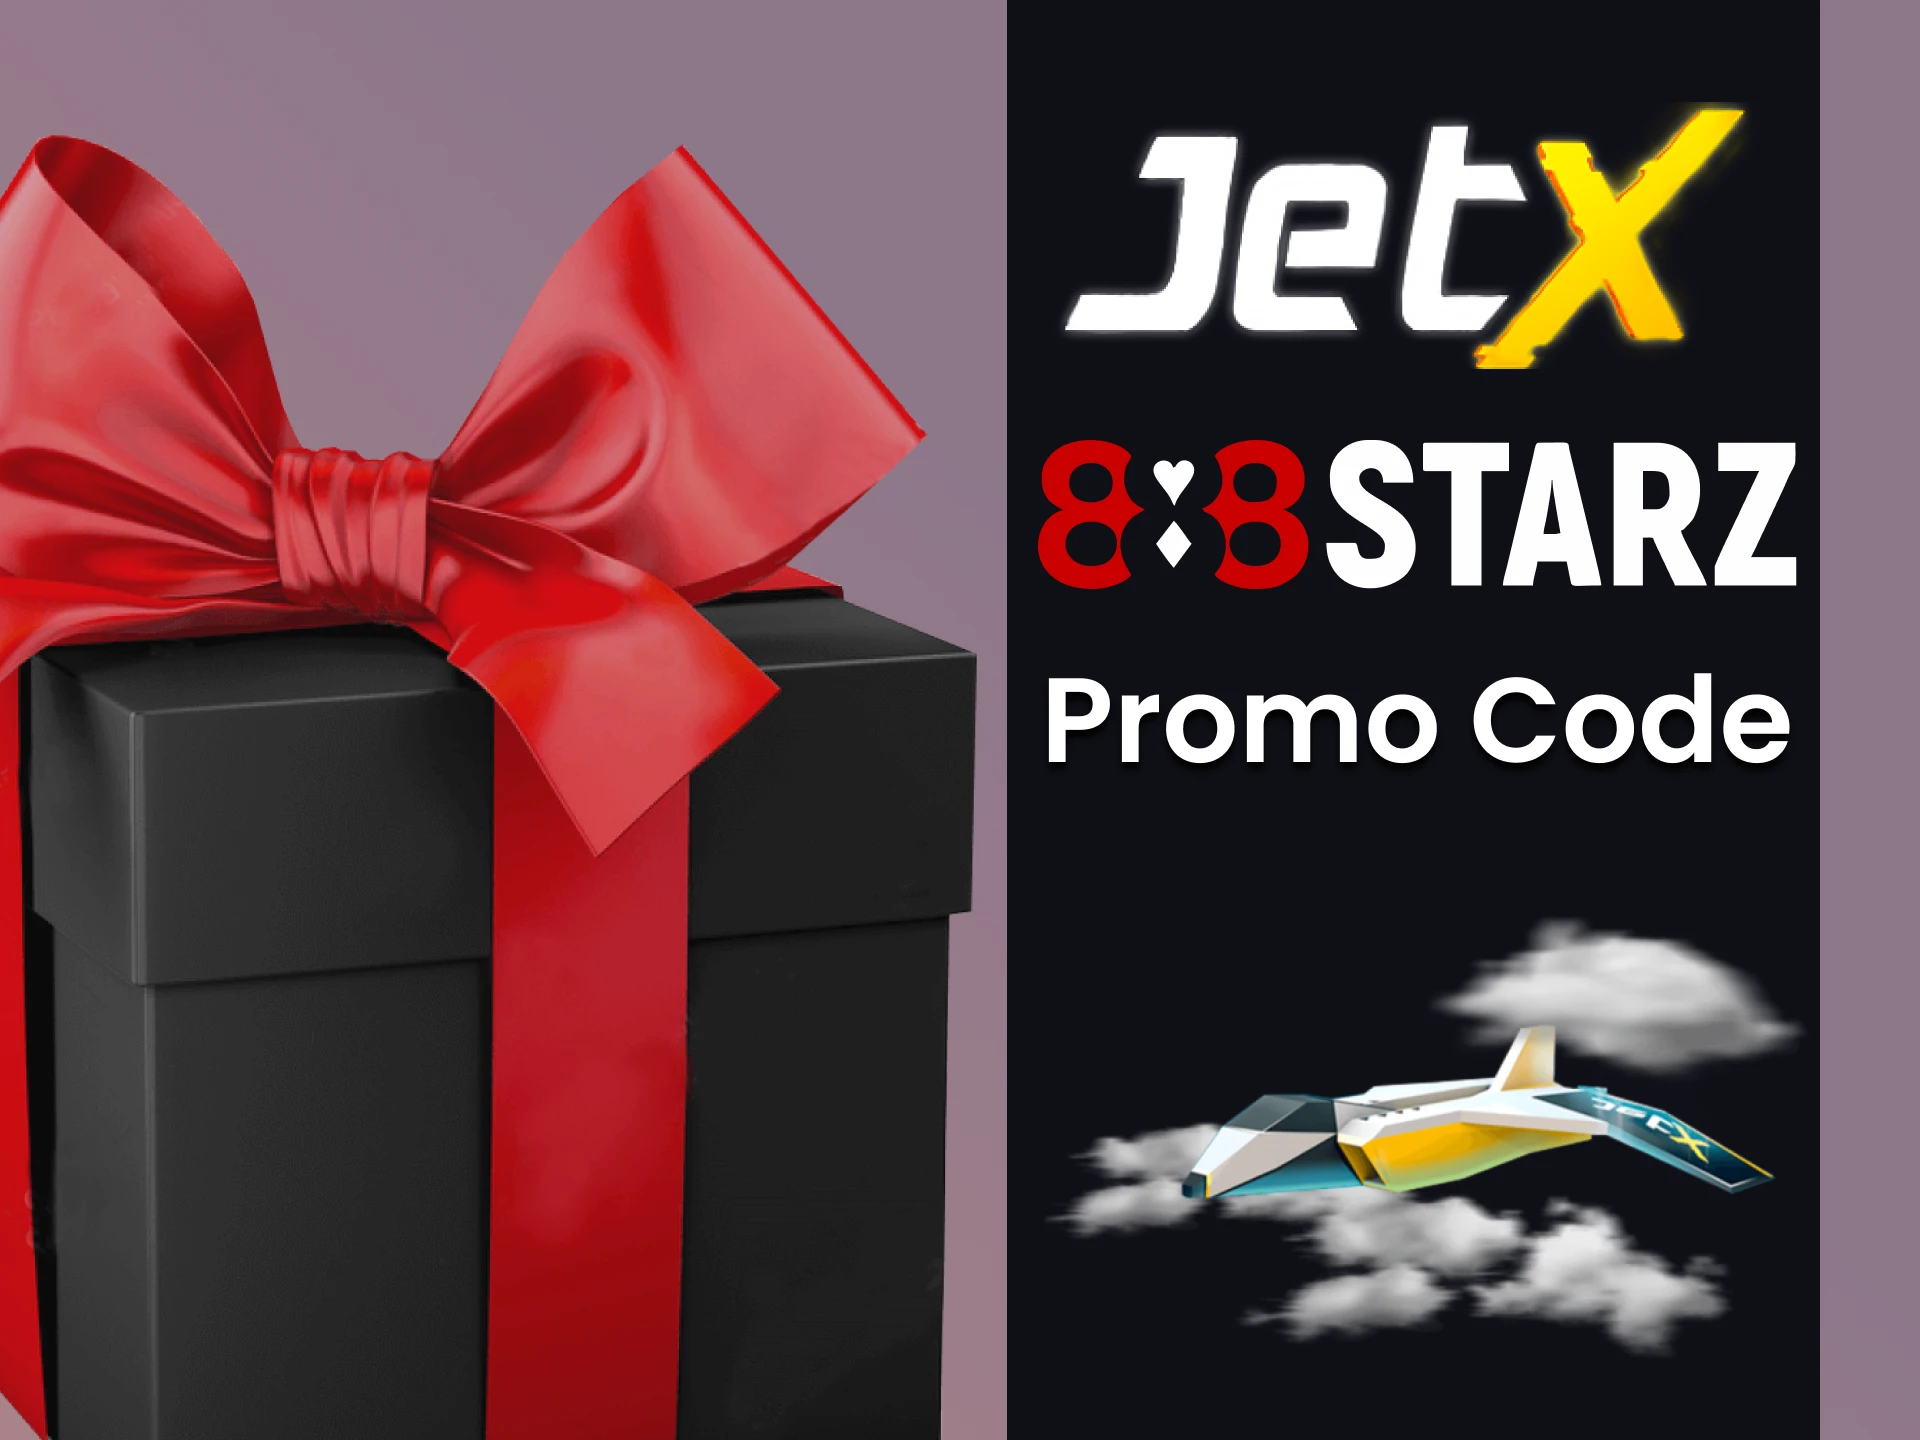 Use promo code for JetX from 888starz.